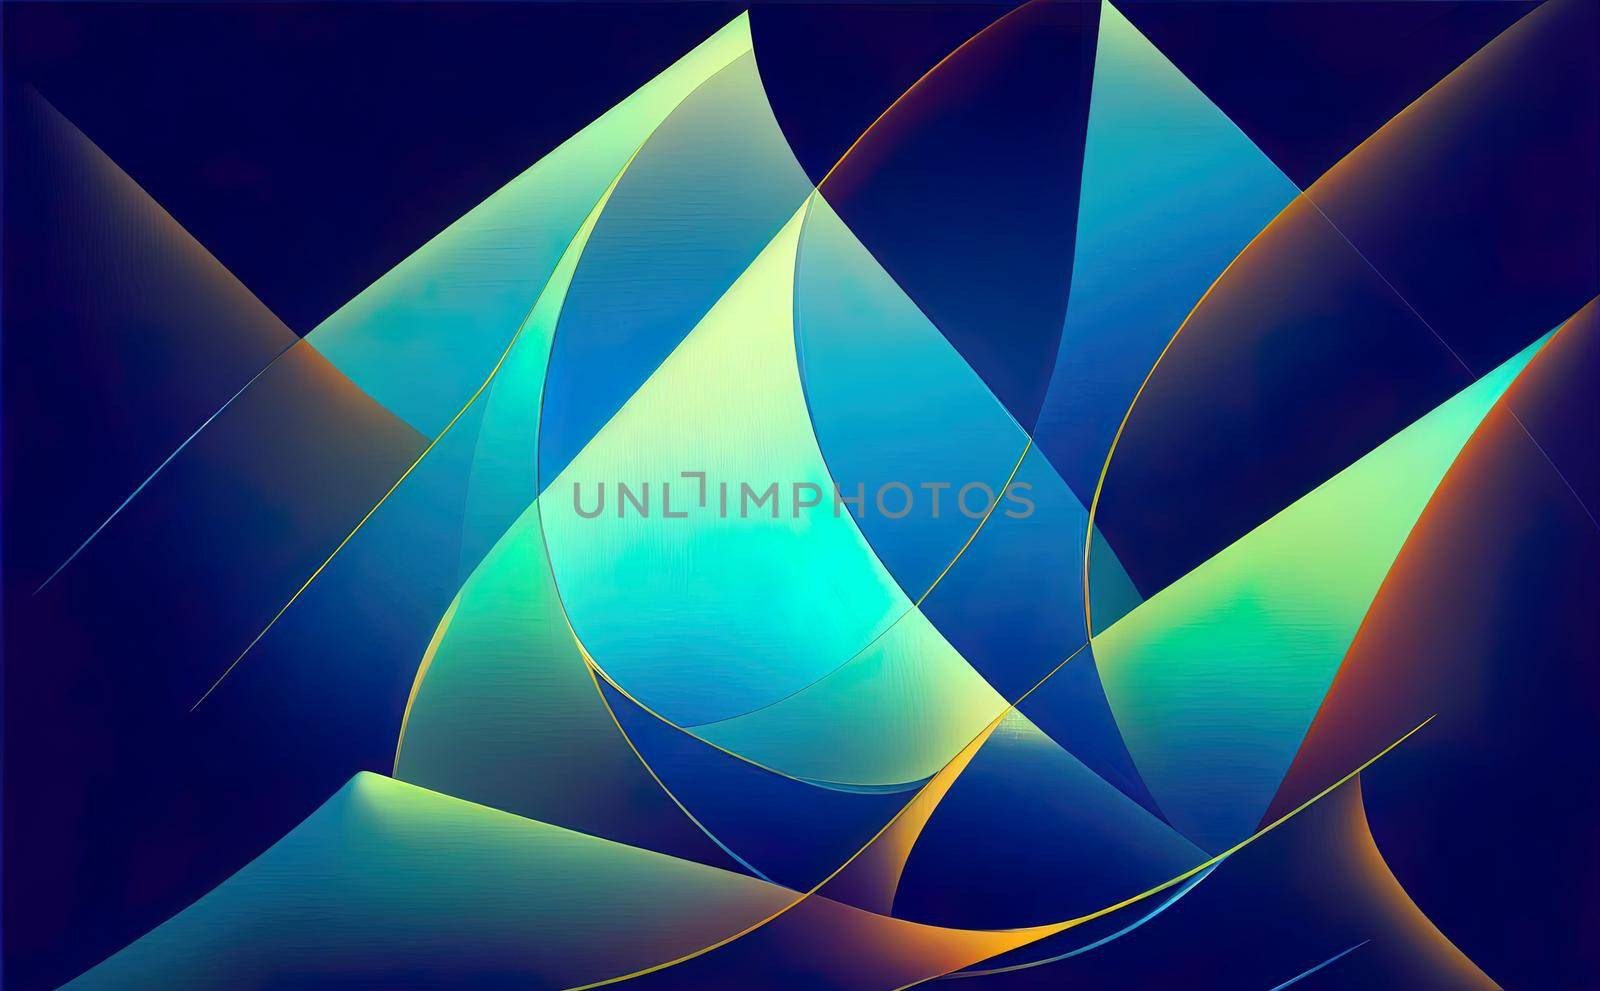 Blue Square Shapes Abstract Elegant background with glowing lines. Modern royal blue background